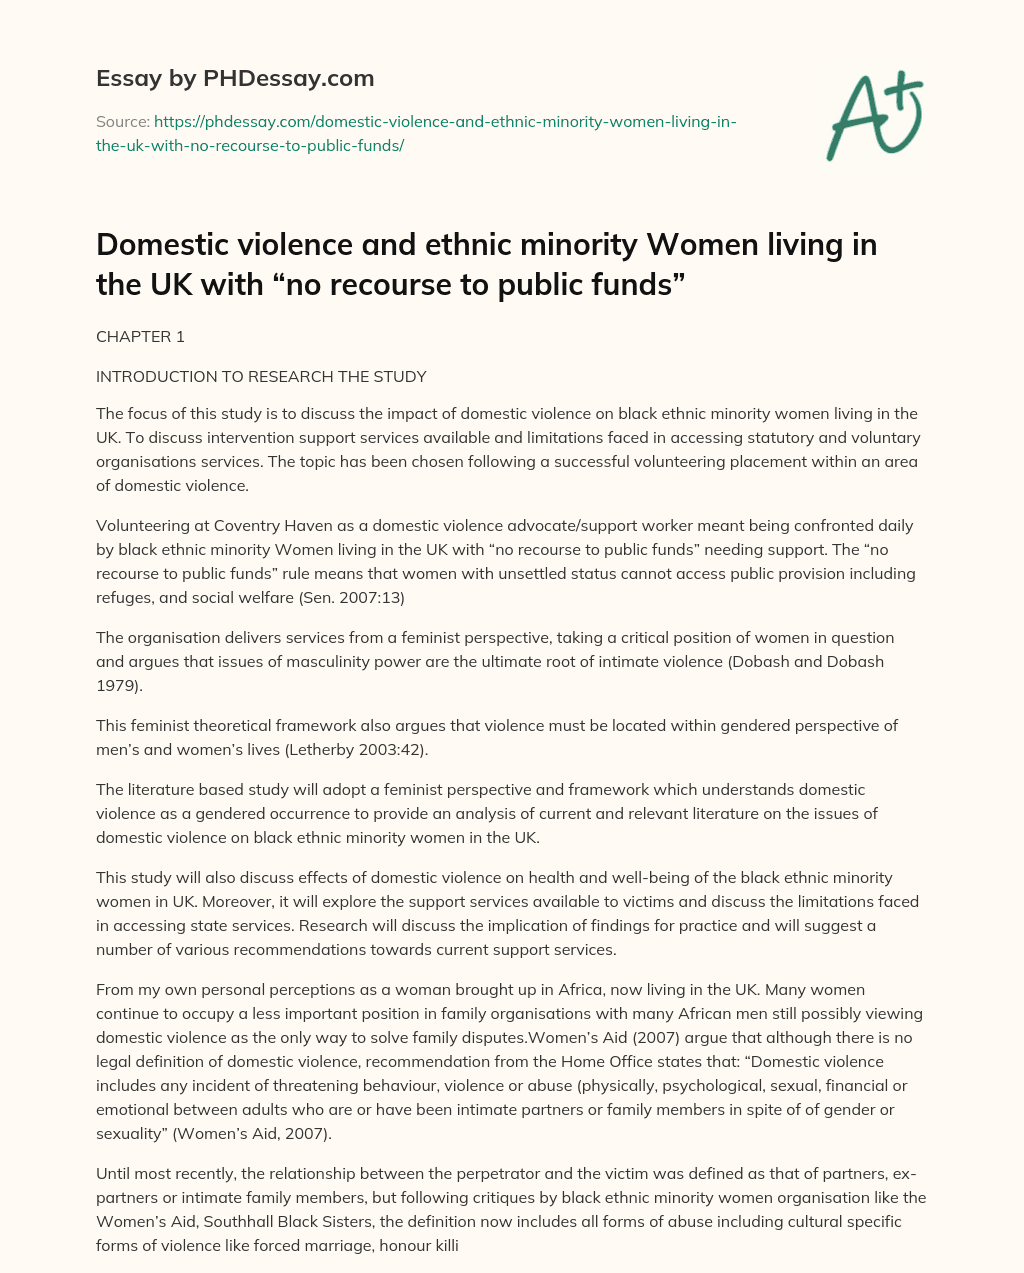 Domestic violence and ethnic minority Women living in the UK with “no recourse to public funds” essay